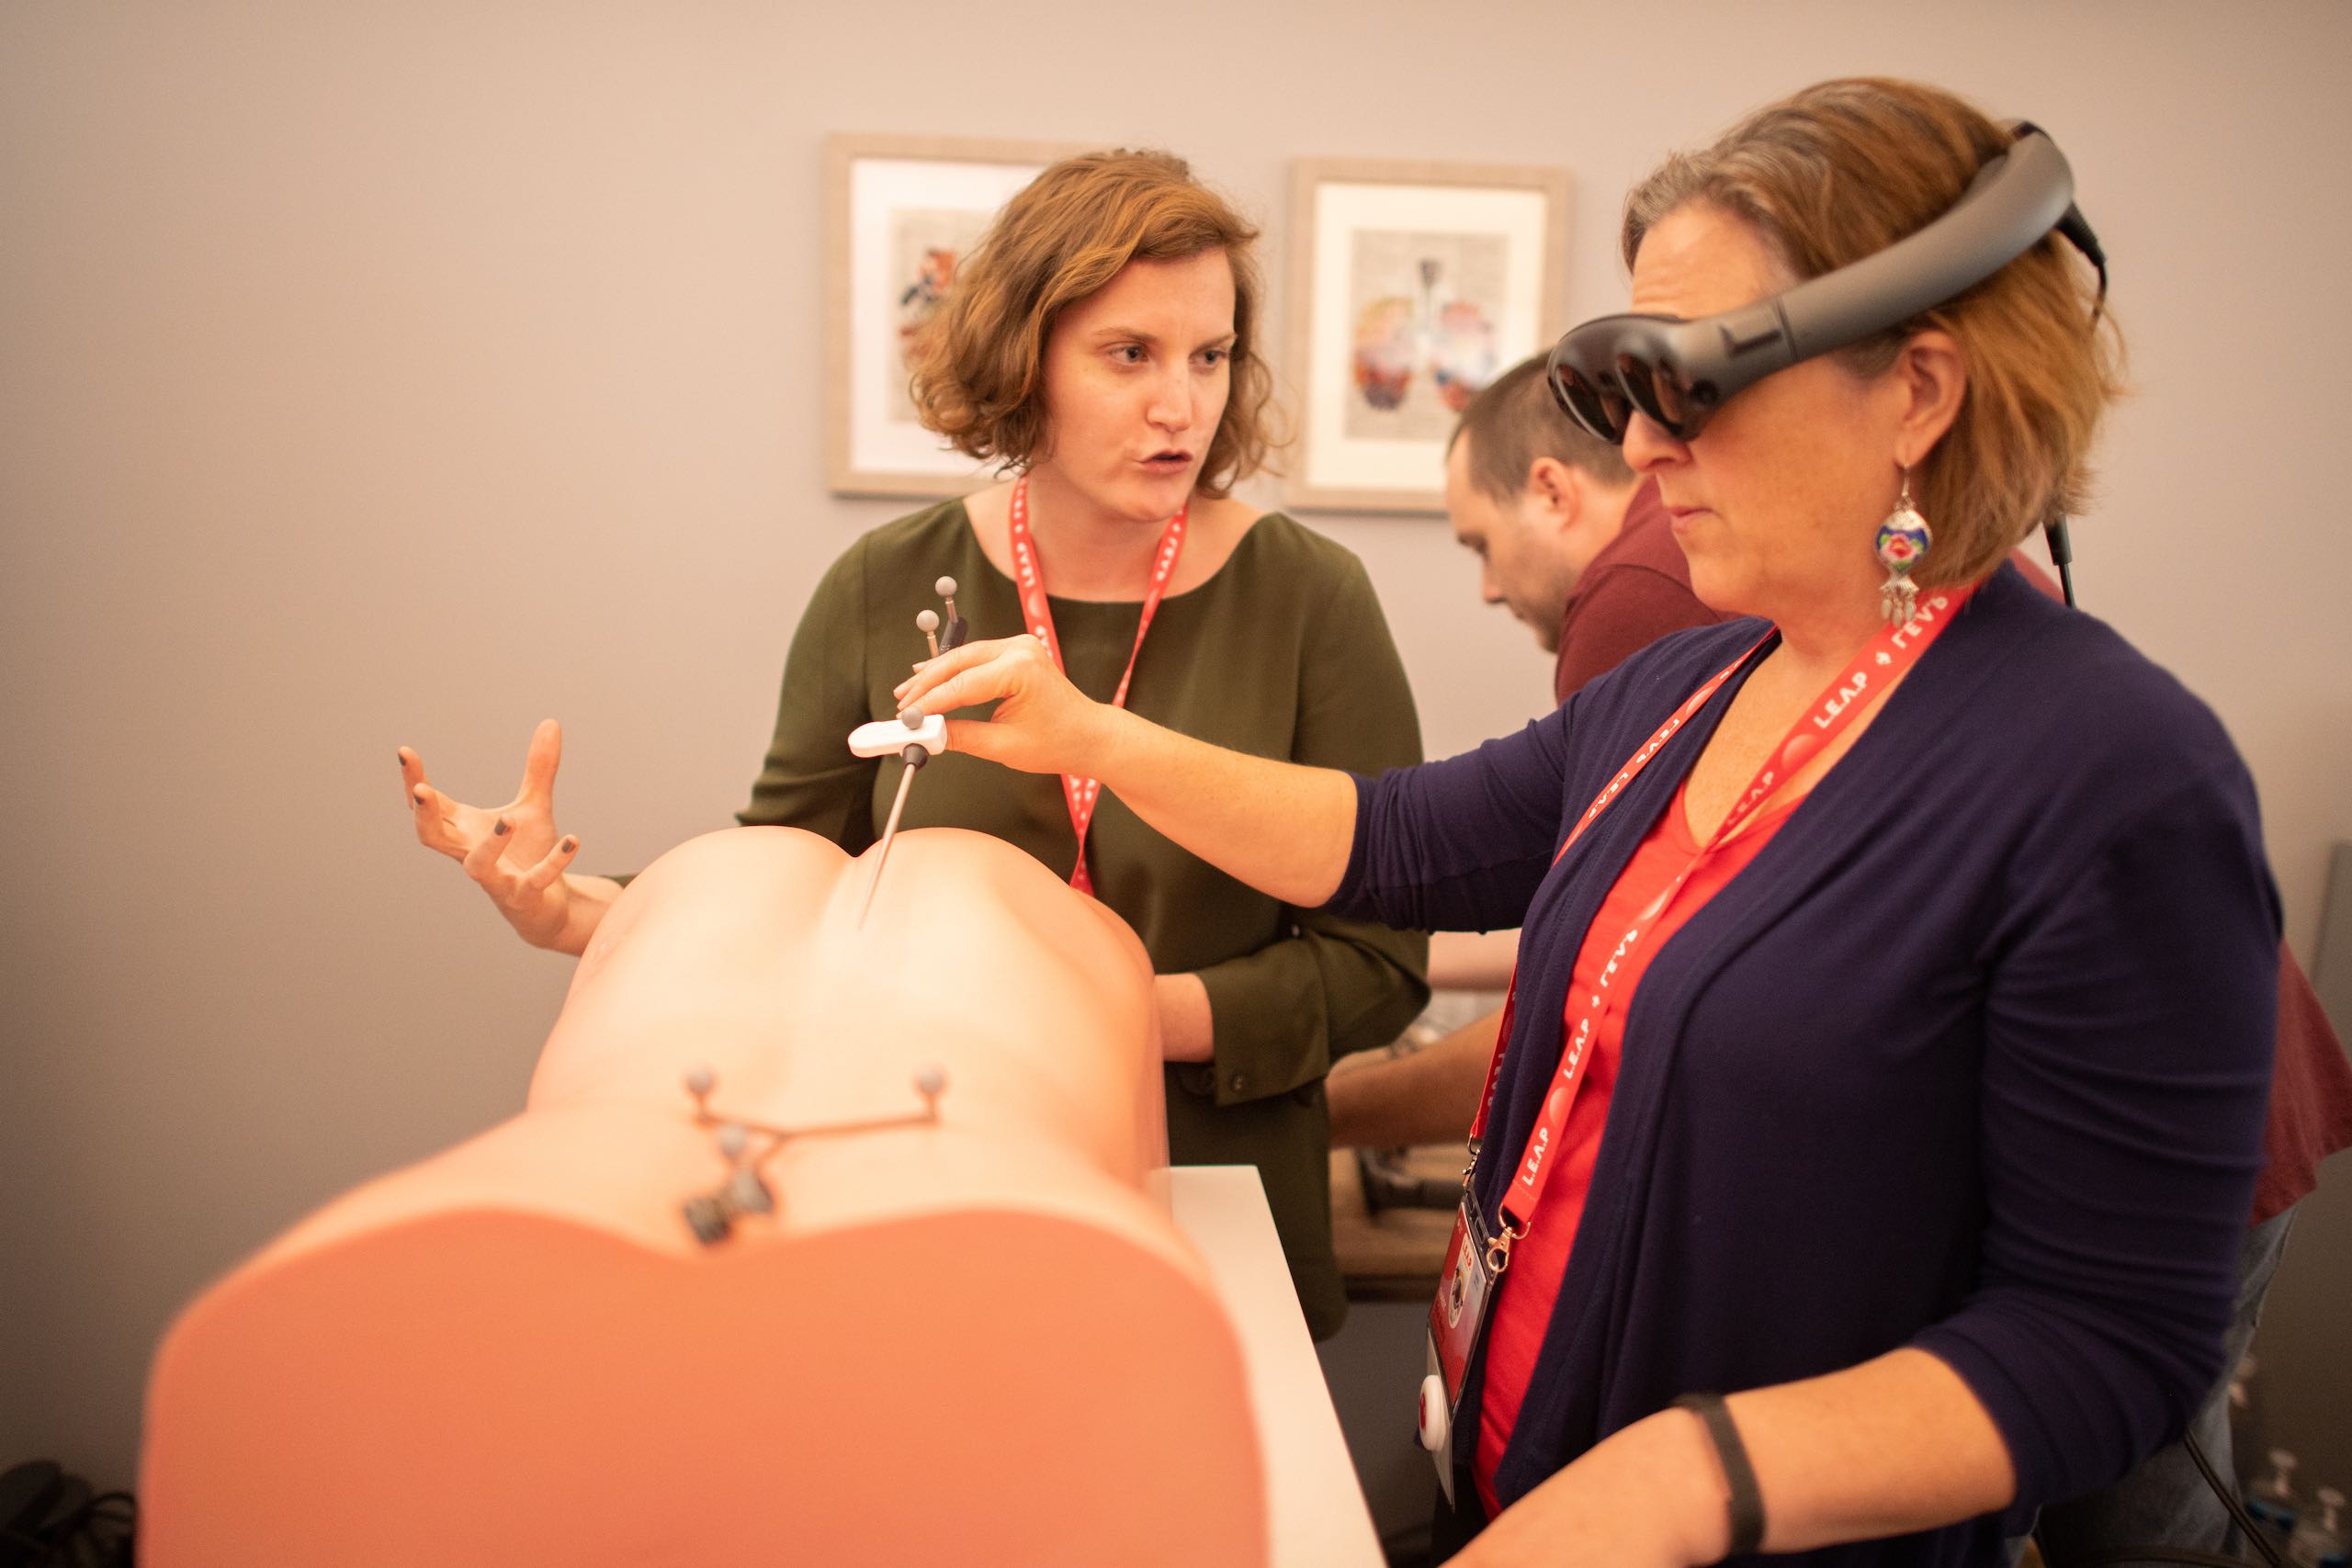 Side profile of a woman wearing Lightwear equipment using a probe in a medical dummy being instructed by another woman